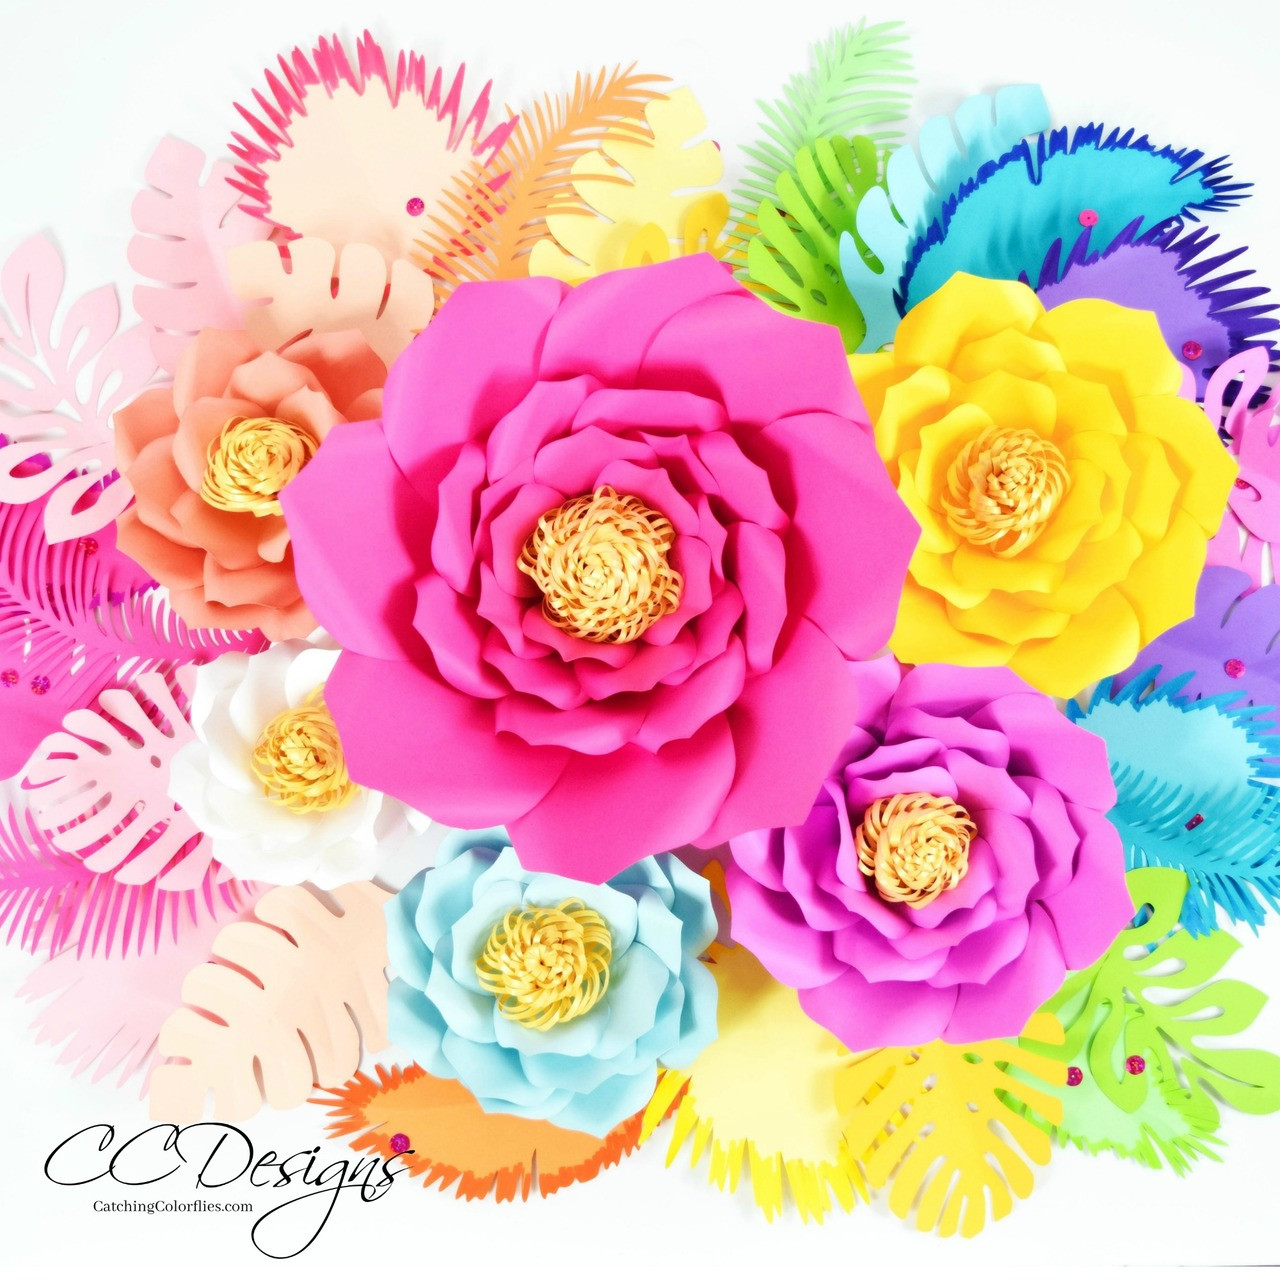 Download Giant Paper Priscilla Flower Template With Tropical Leaves Catching Colorflies